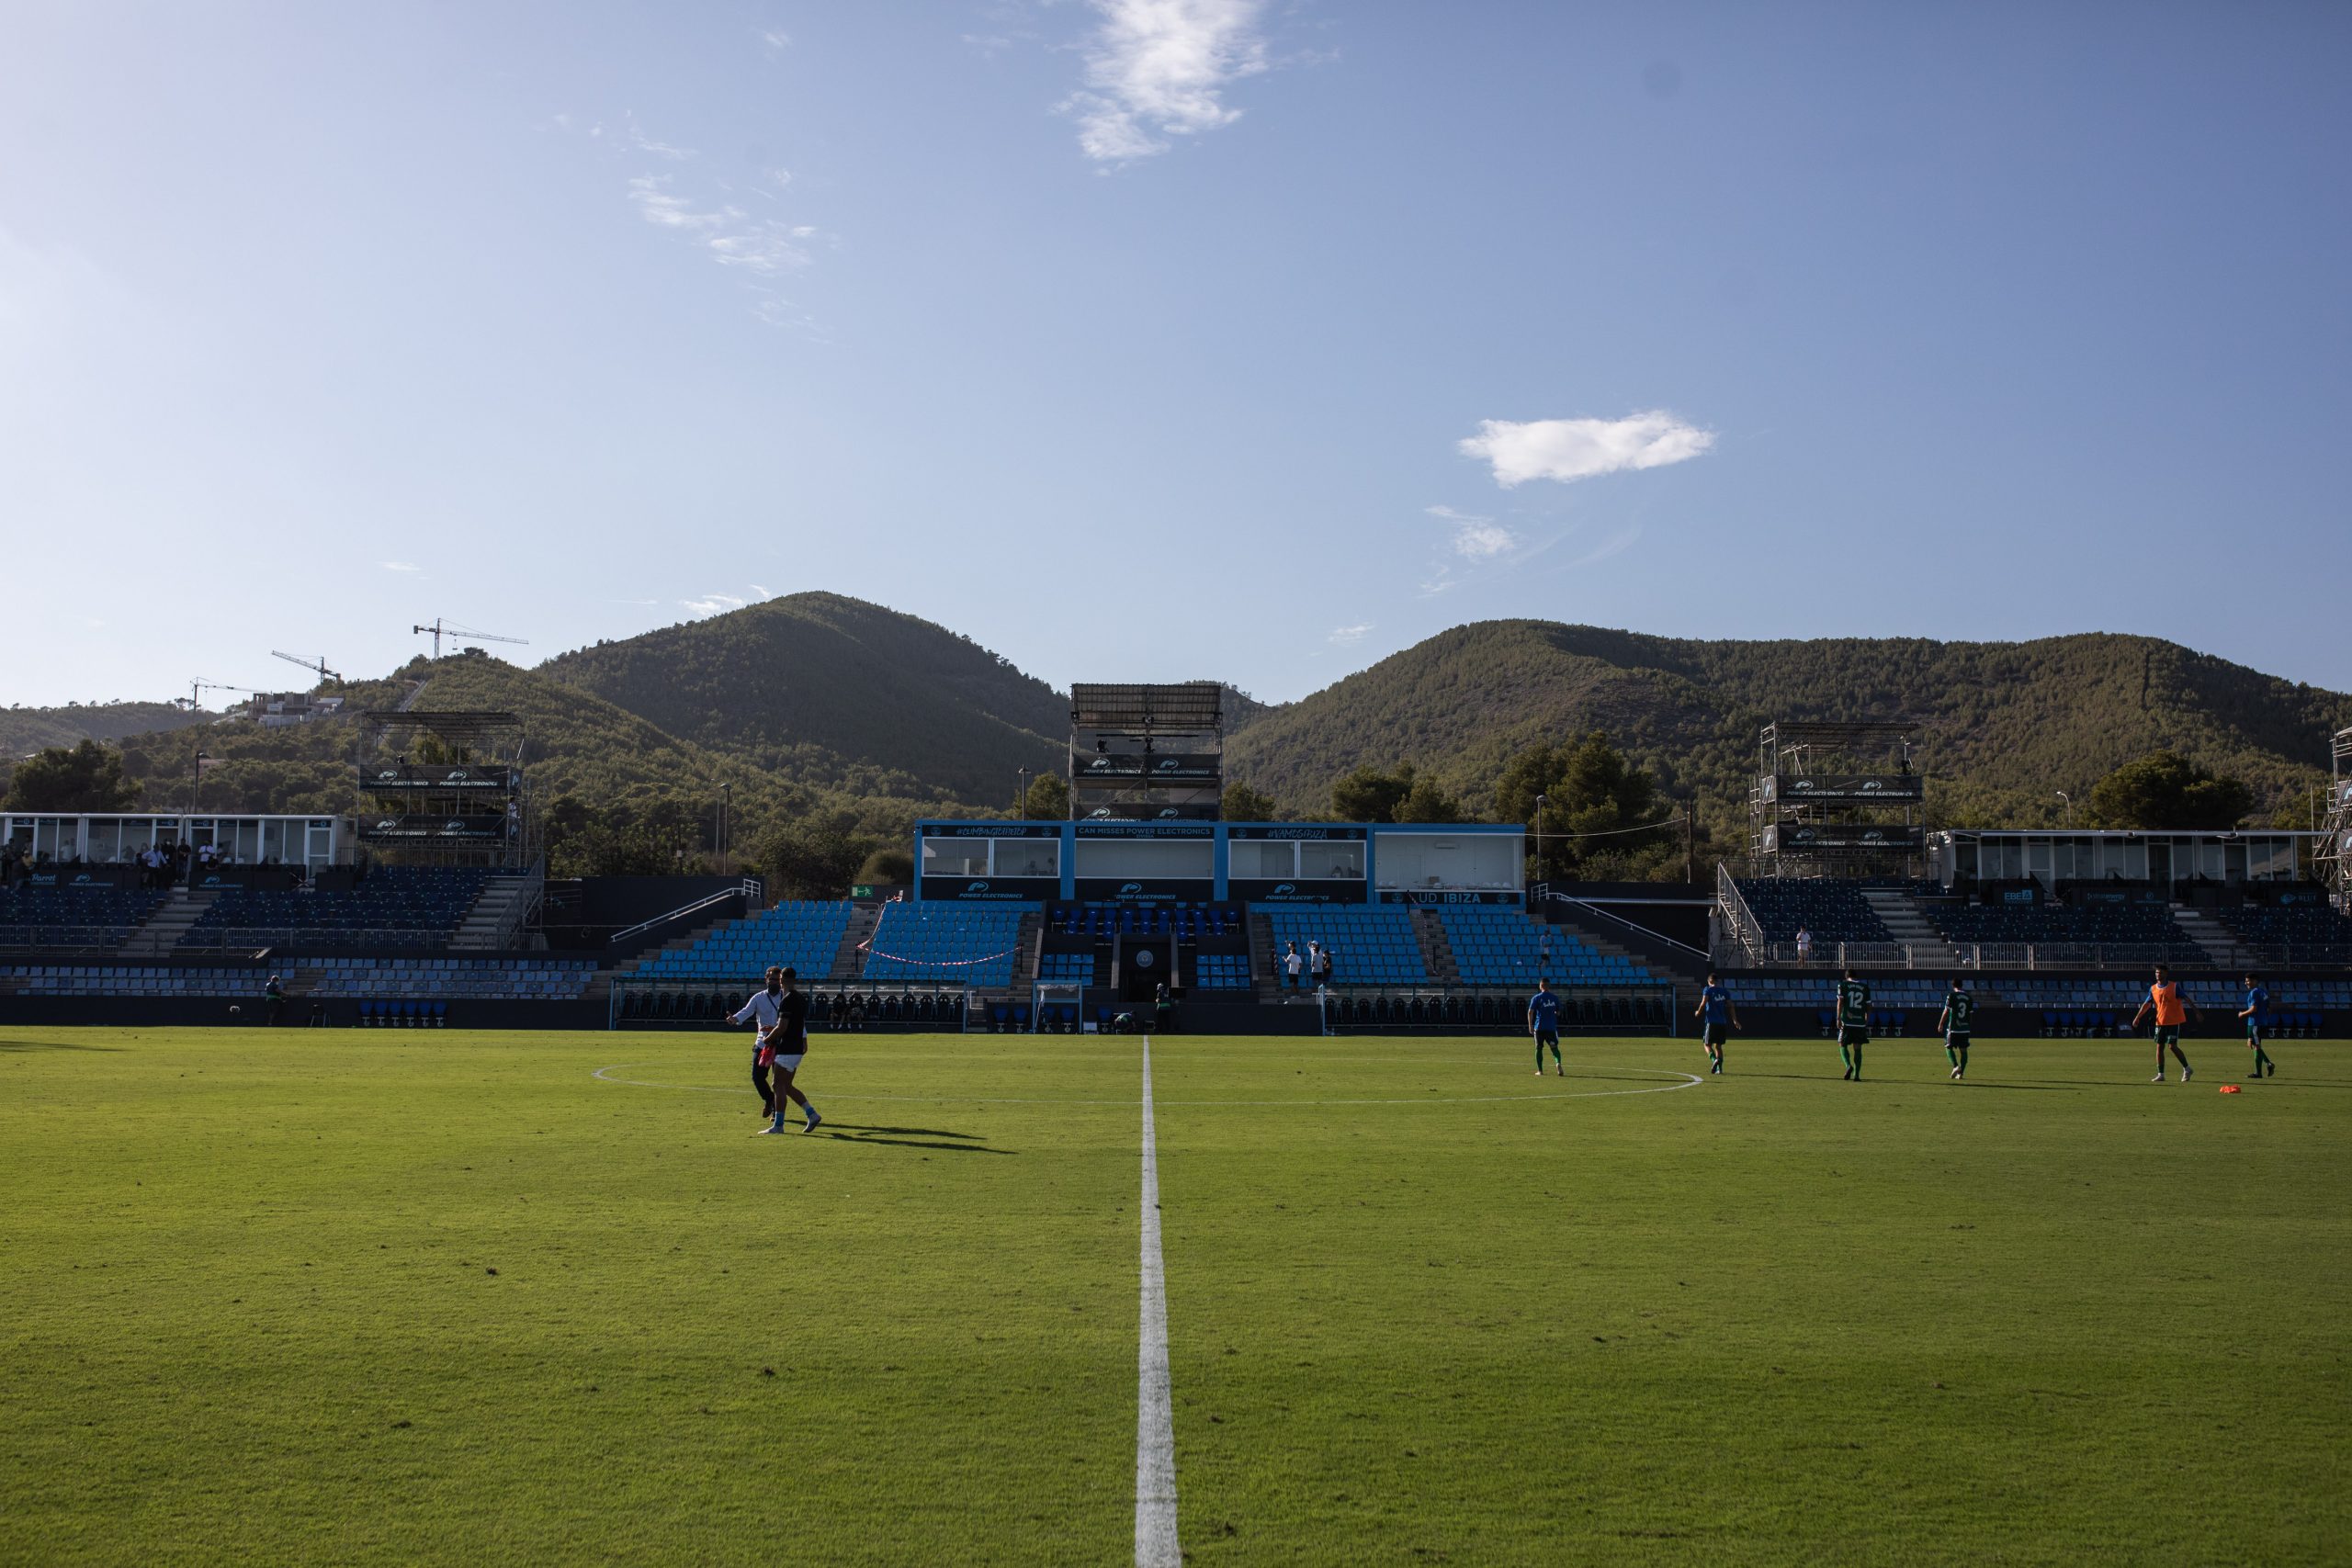 Grass Reseeding At Can Misses-3 Forces Cd Ibiza To Play In Santa Eulària